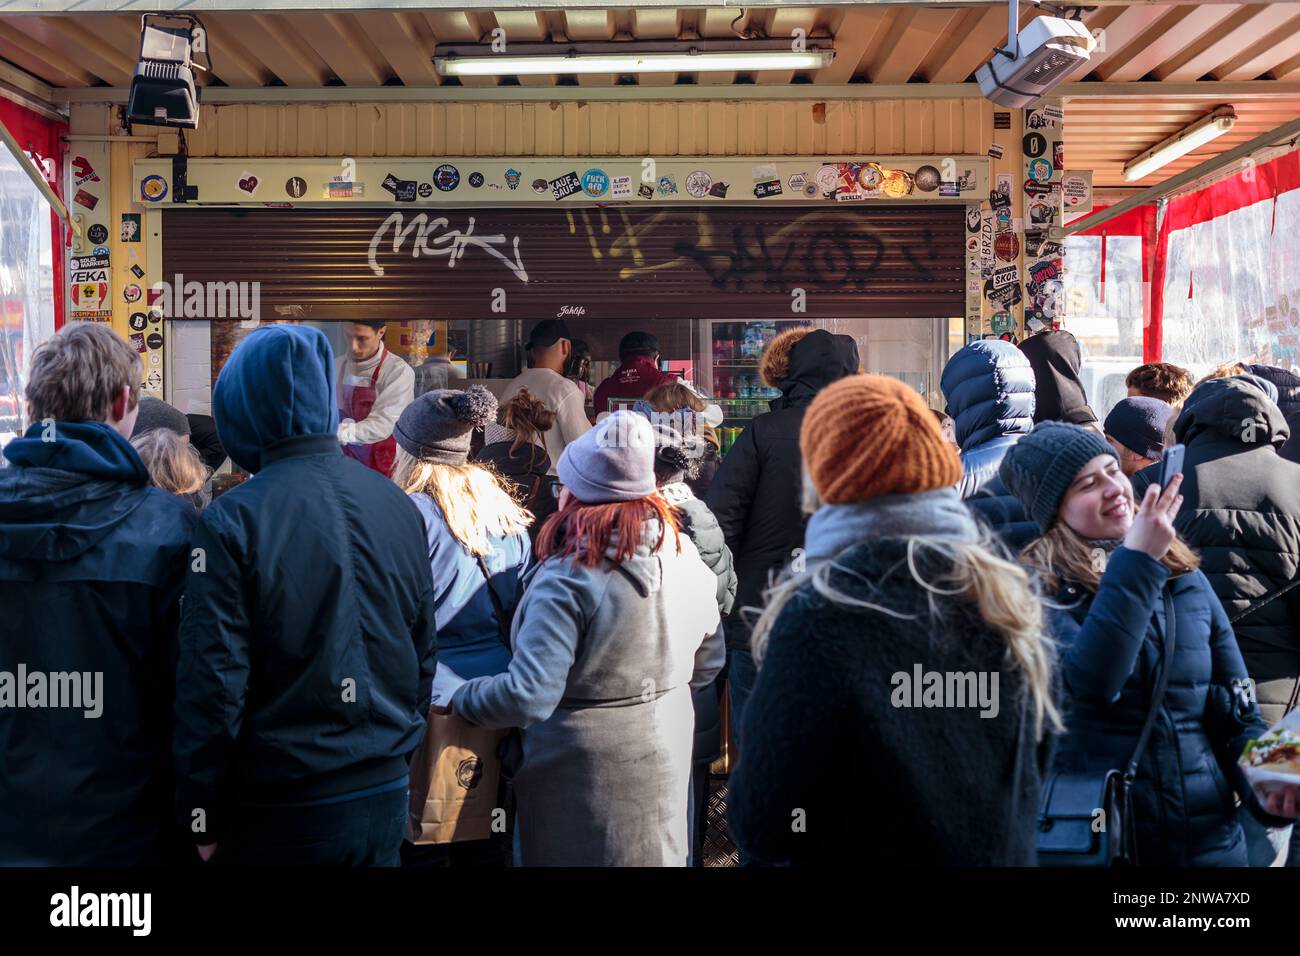 Tourists queue in large numbers during a cold and sunny day at the famous Mustafa's Gemüse Kebap on Mehringdamm, Kreuzberg, Berlin, Germany. Stock Photo